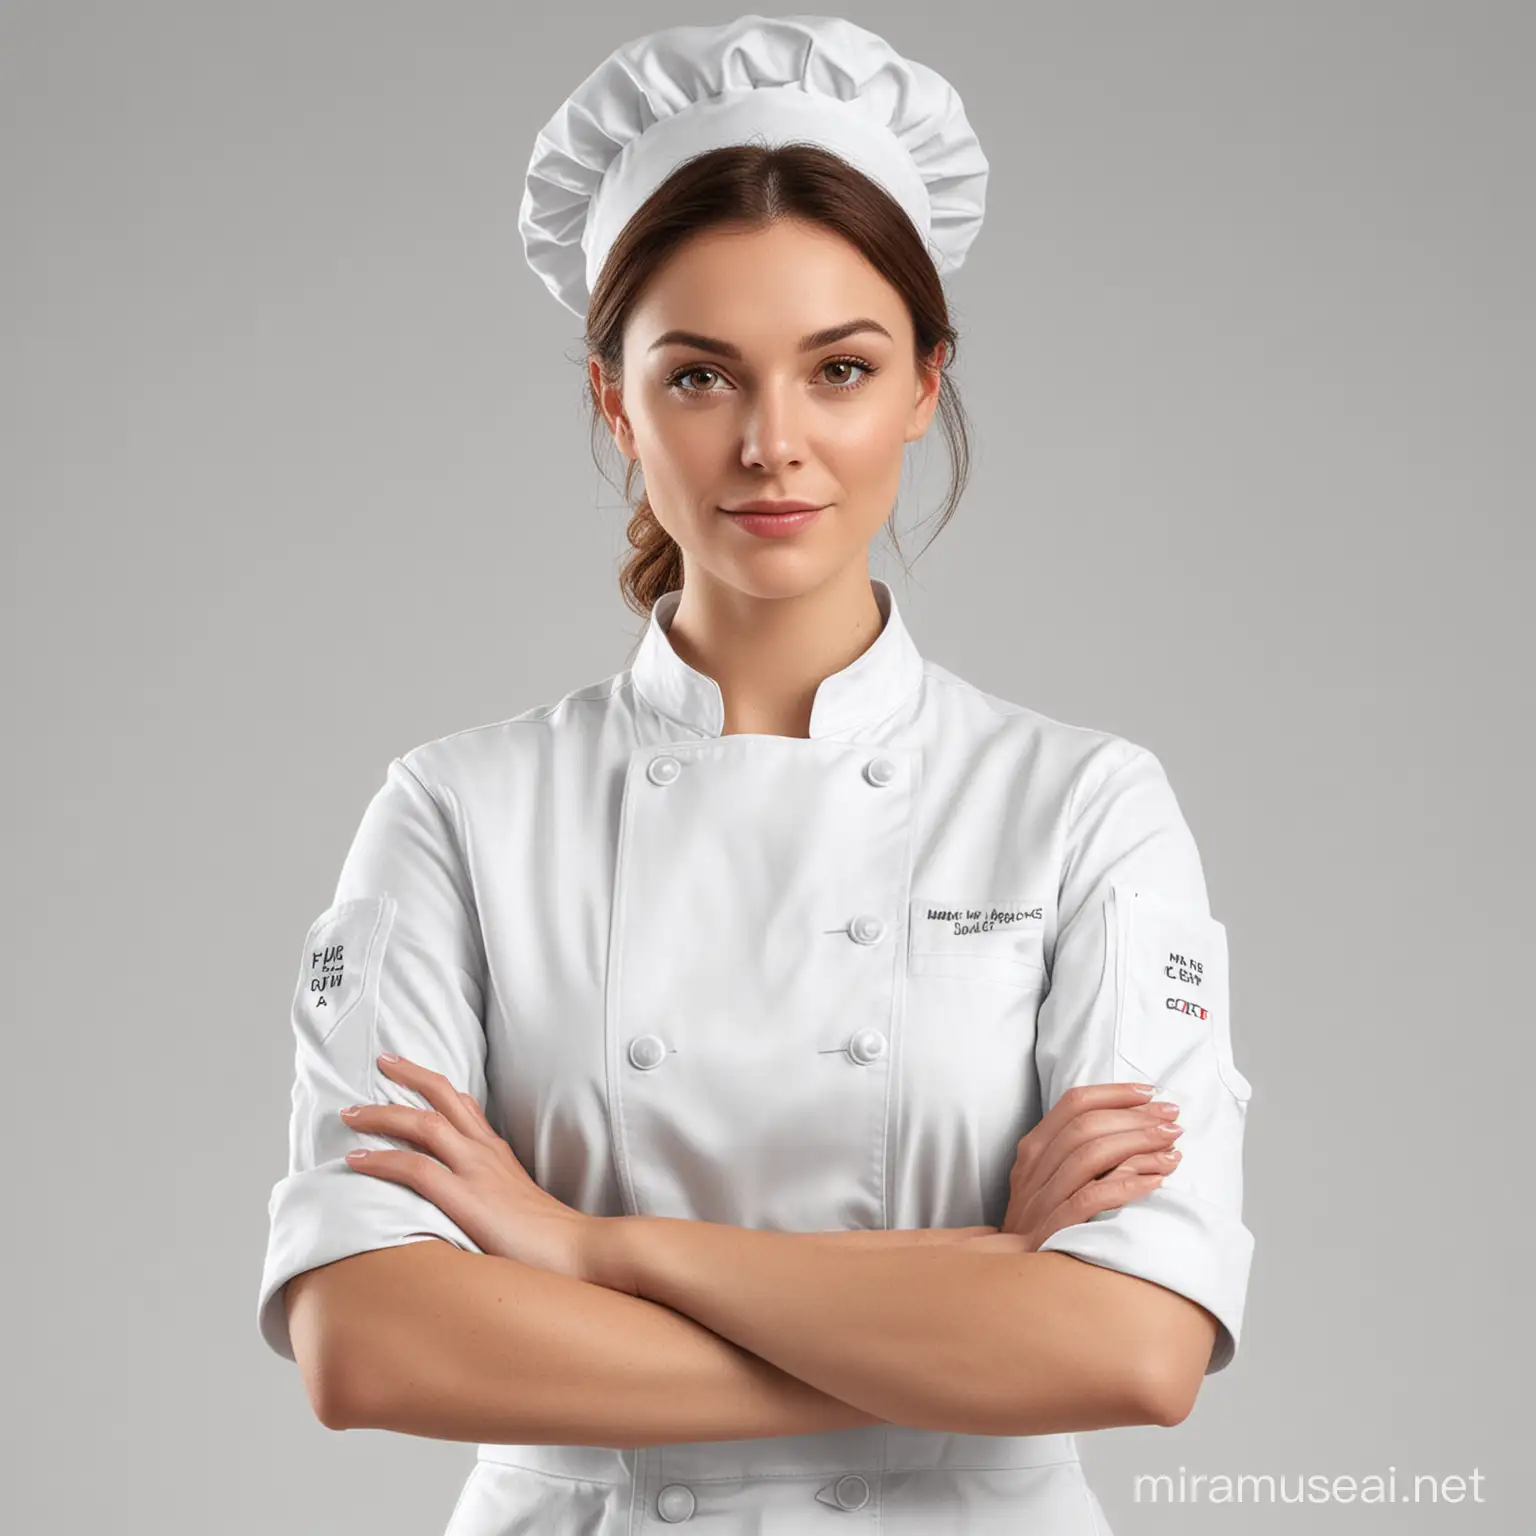 Create a realistic 3d portrait (Waist up) of a white female chef in chef attire on a white background